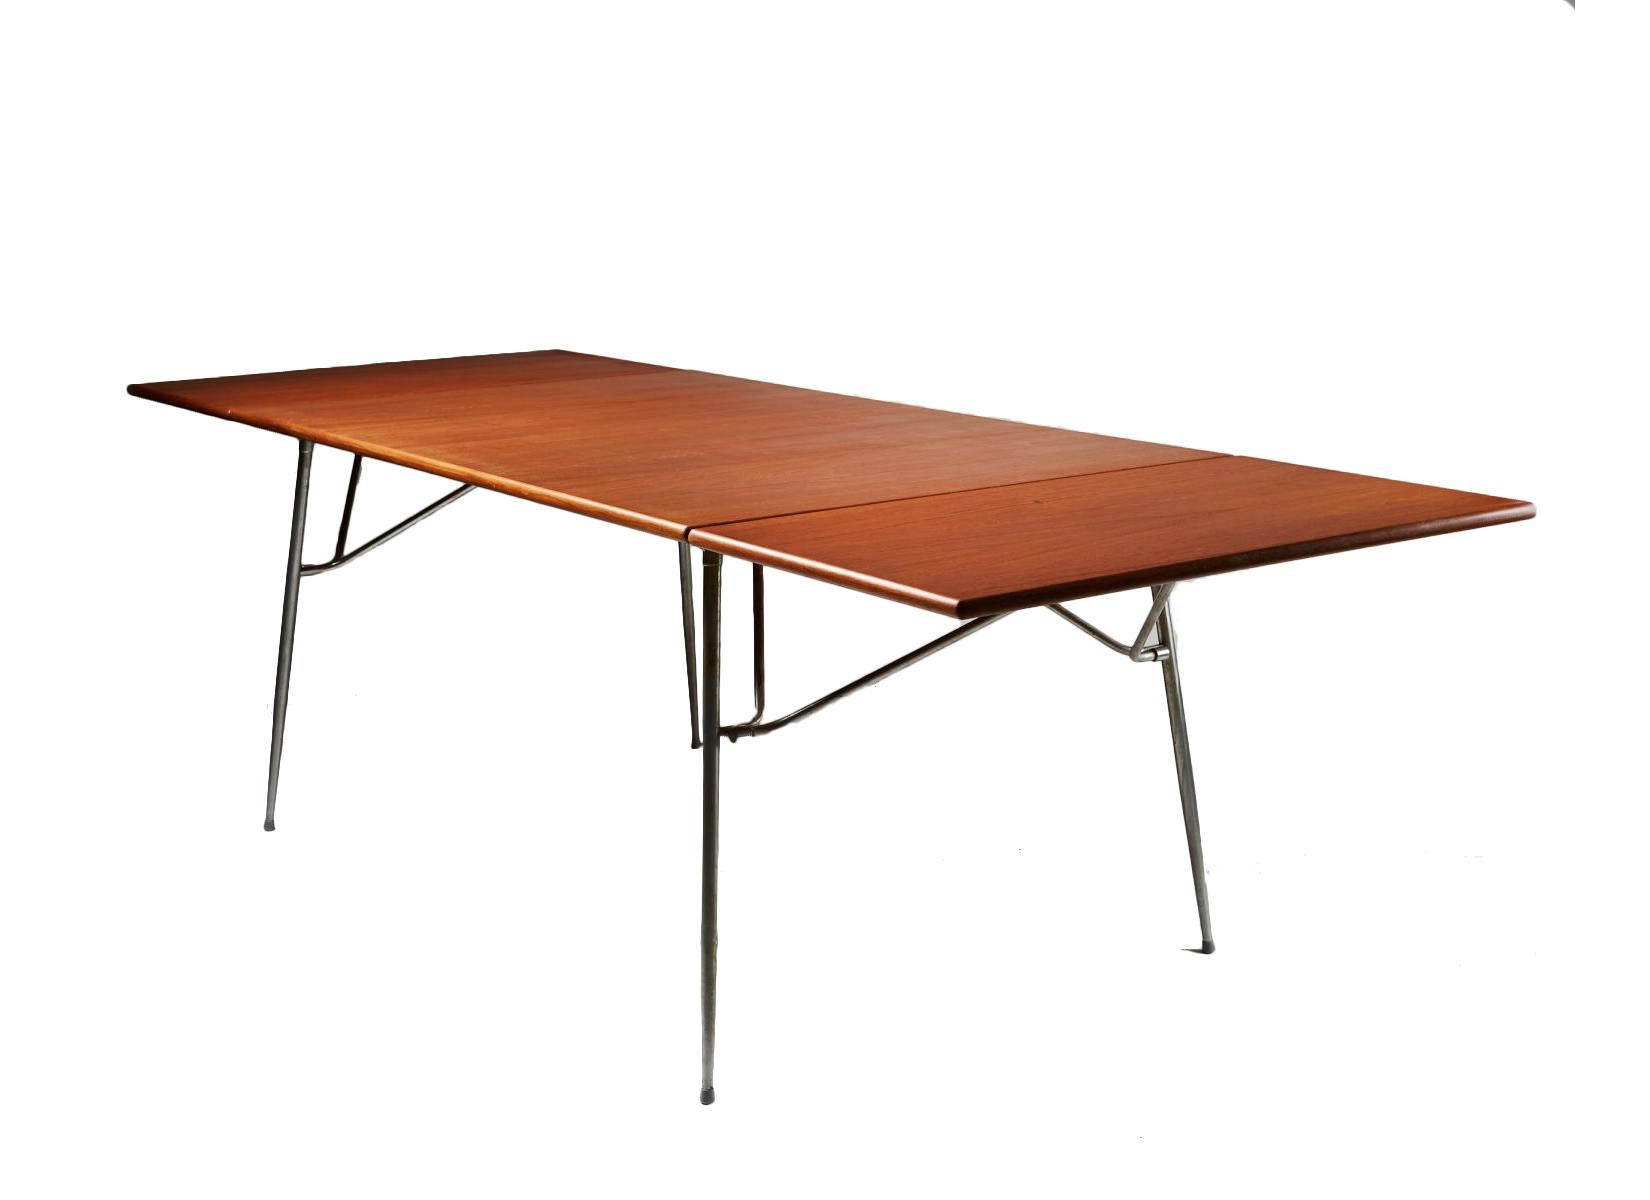 Danish Modernism free-standing office desk or dining table, model 206 by Borge Morgensen, made of fined teak top and matte chrome-plated steel frame, fitted with drop-leaves from 50 cm on each side.
The leaves can be easily removed or